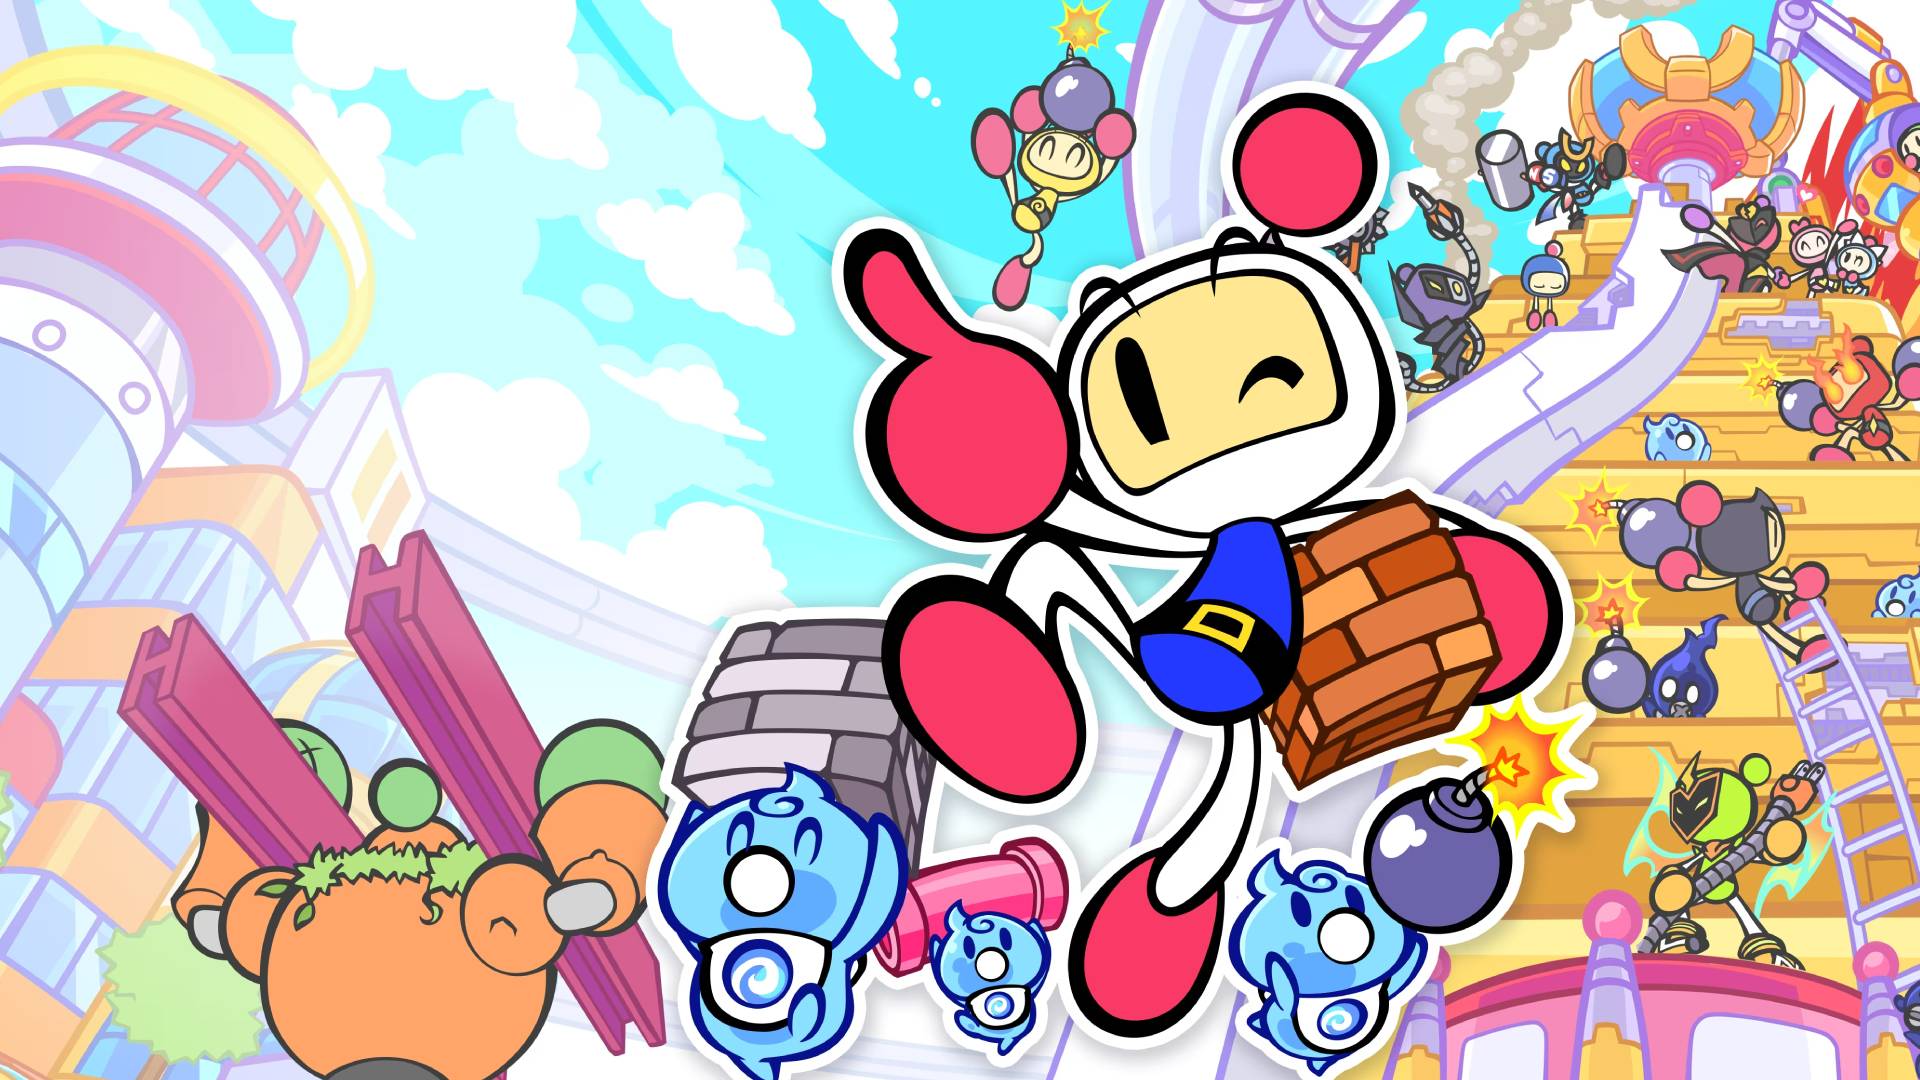 Super Bomberman R 2 review – a damp squib sequel infused with some fun